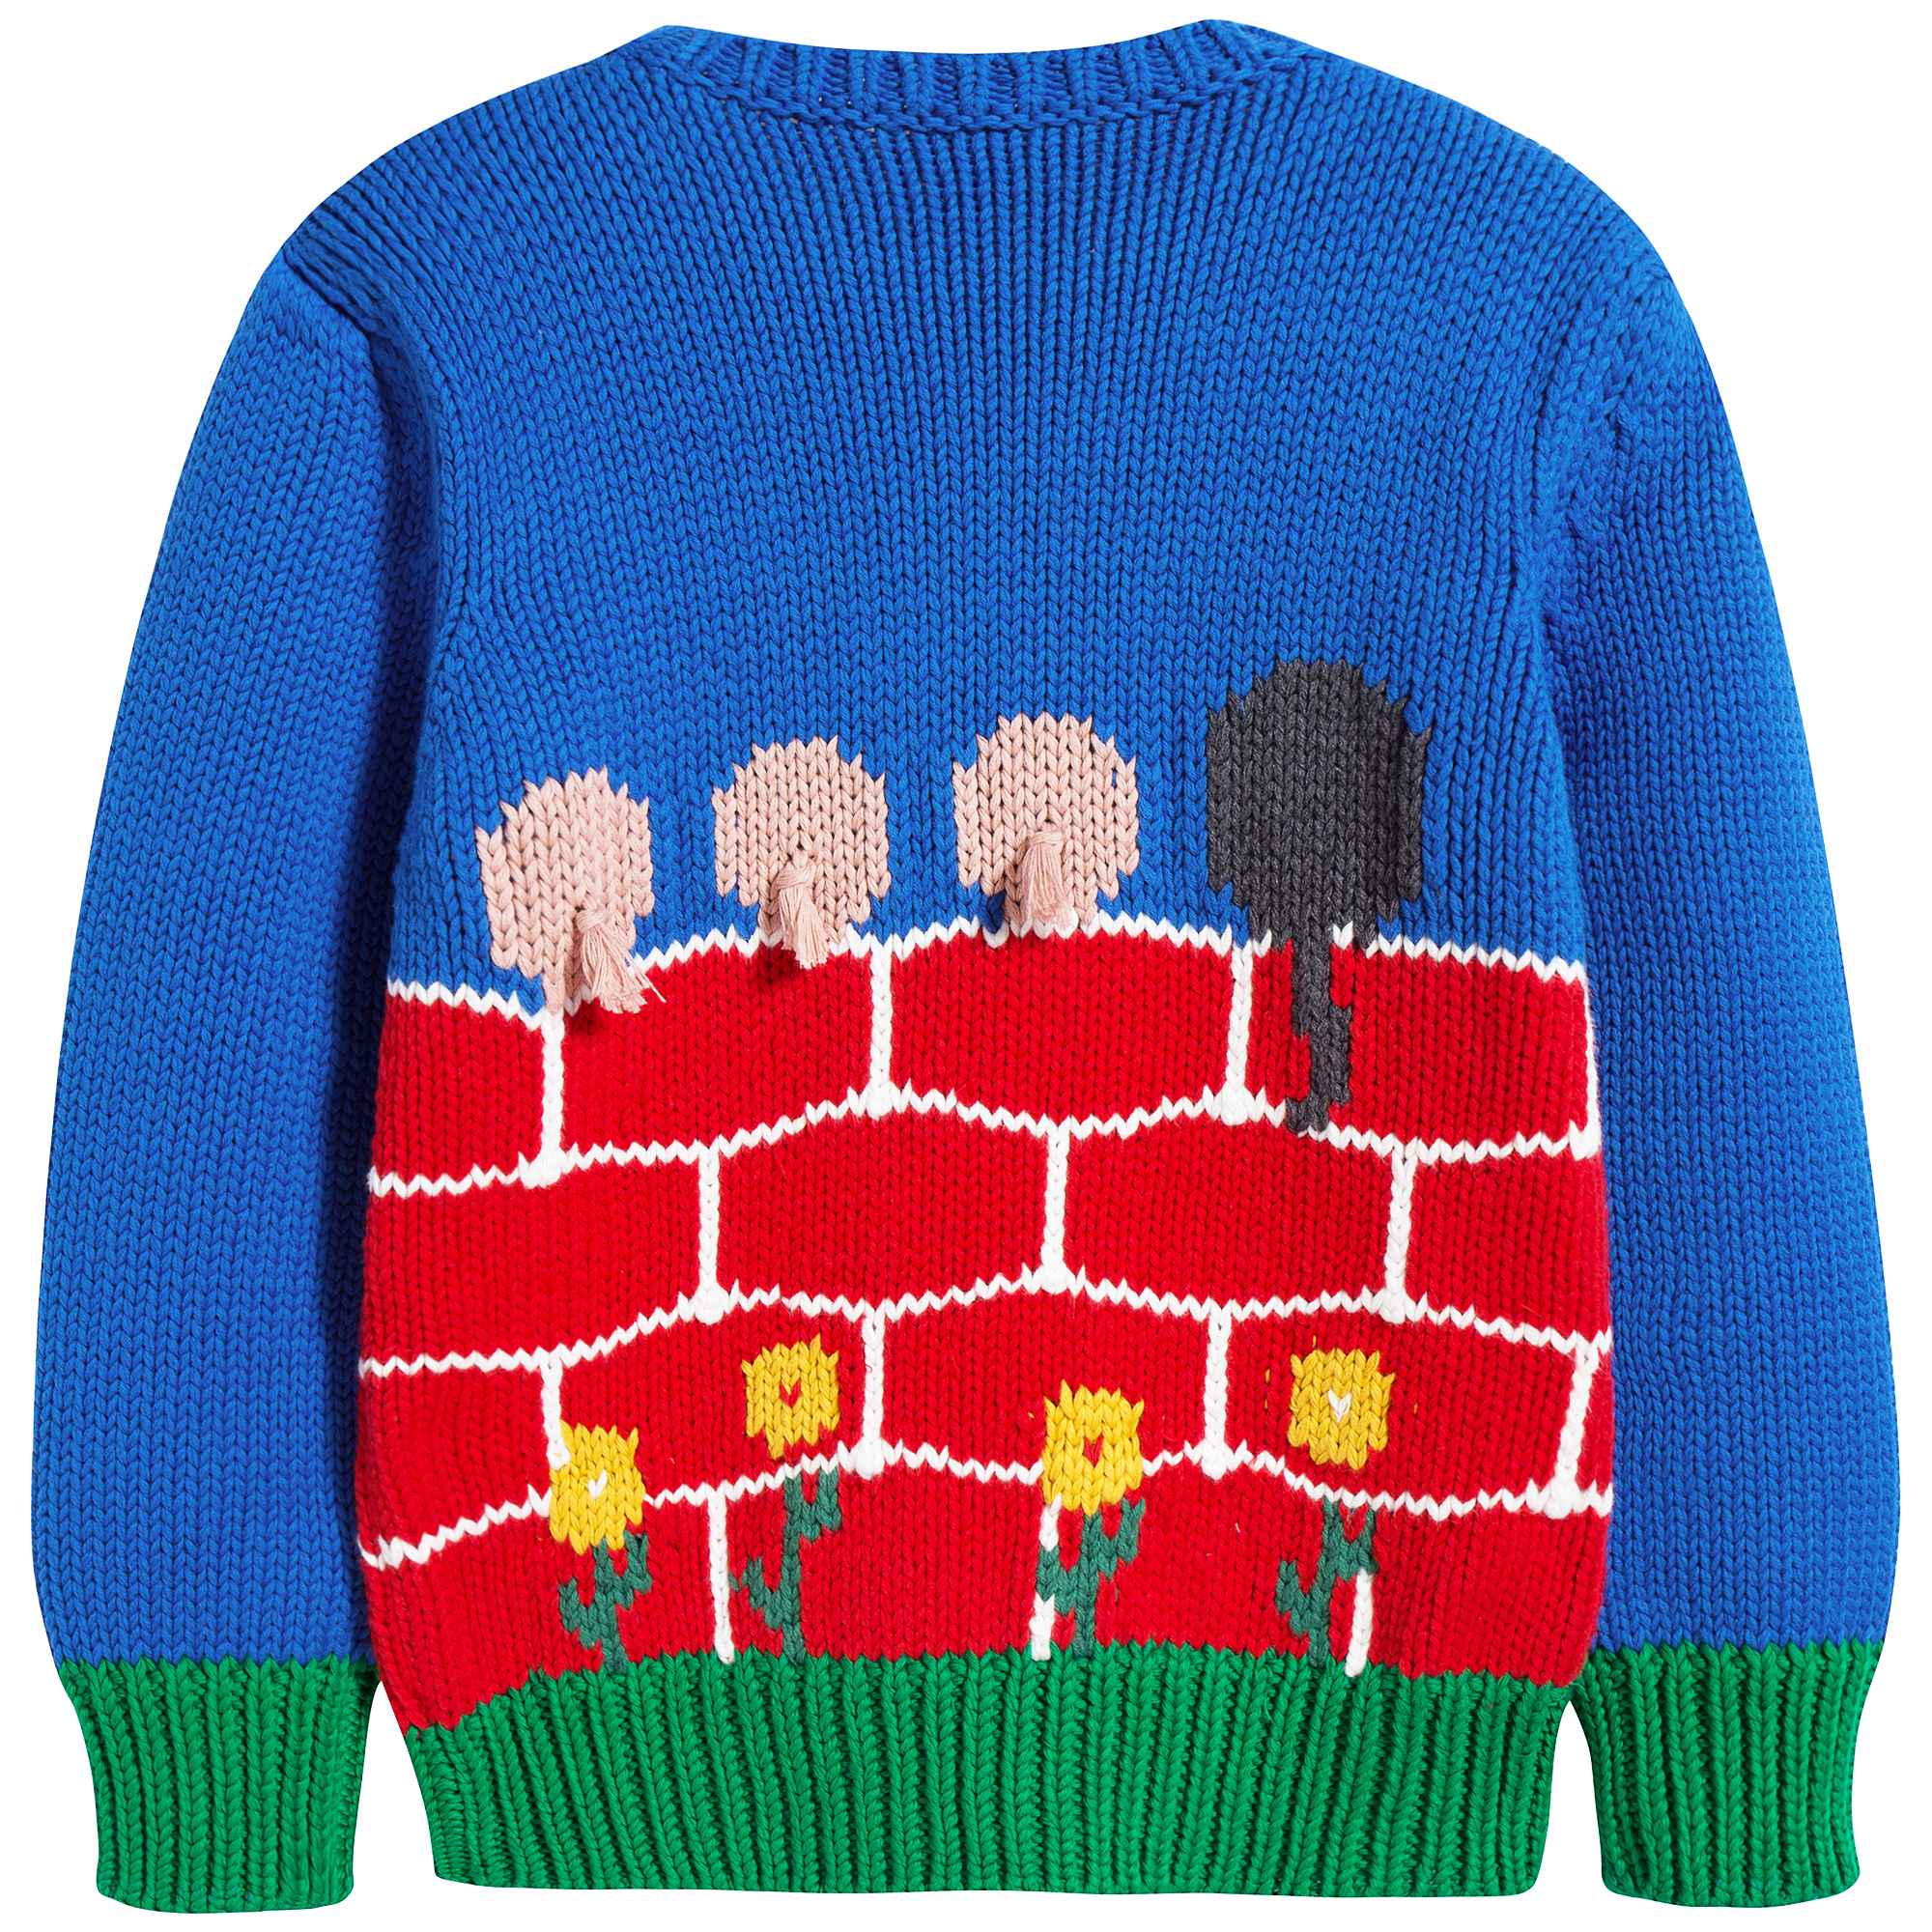 Boys Blue & Red Sweater